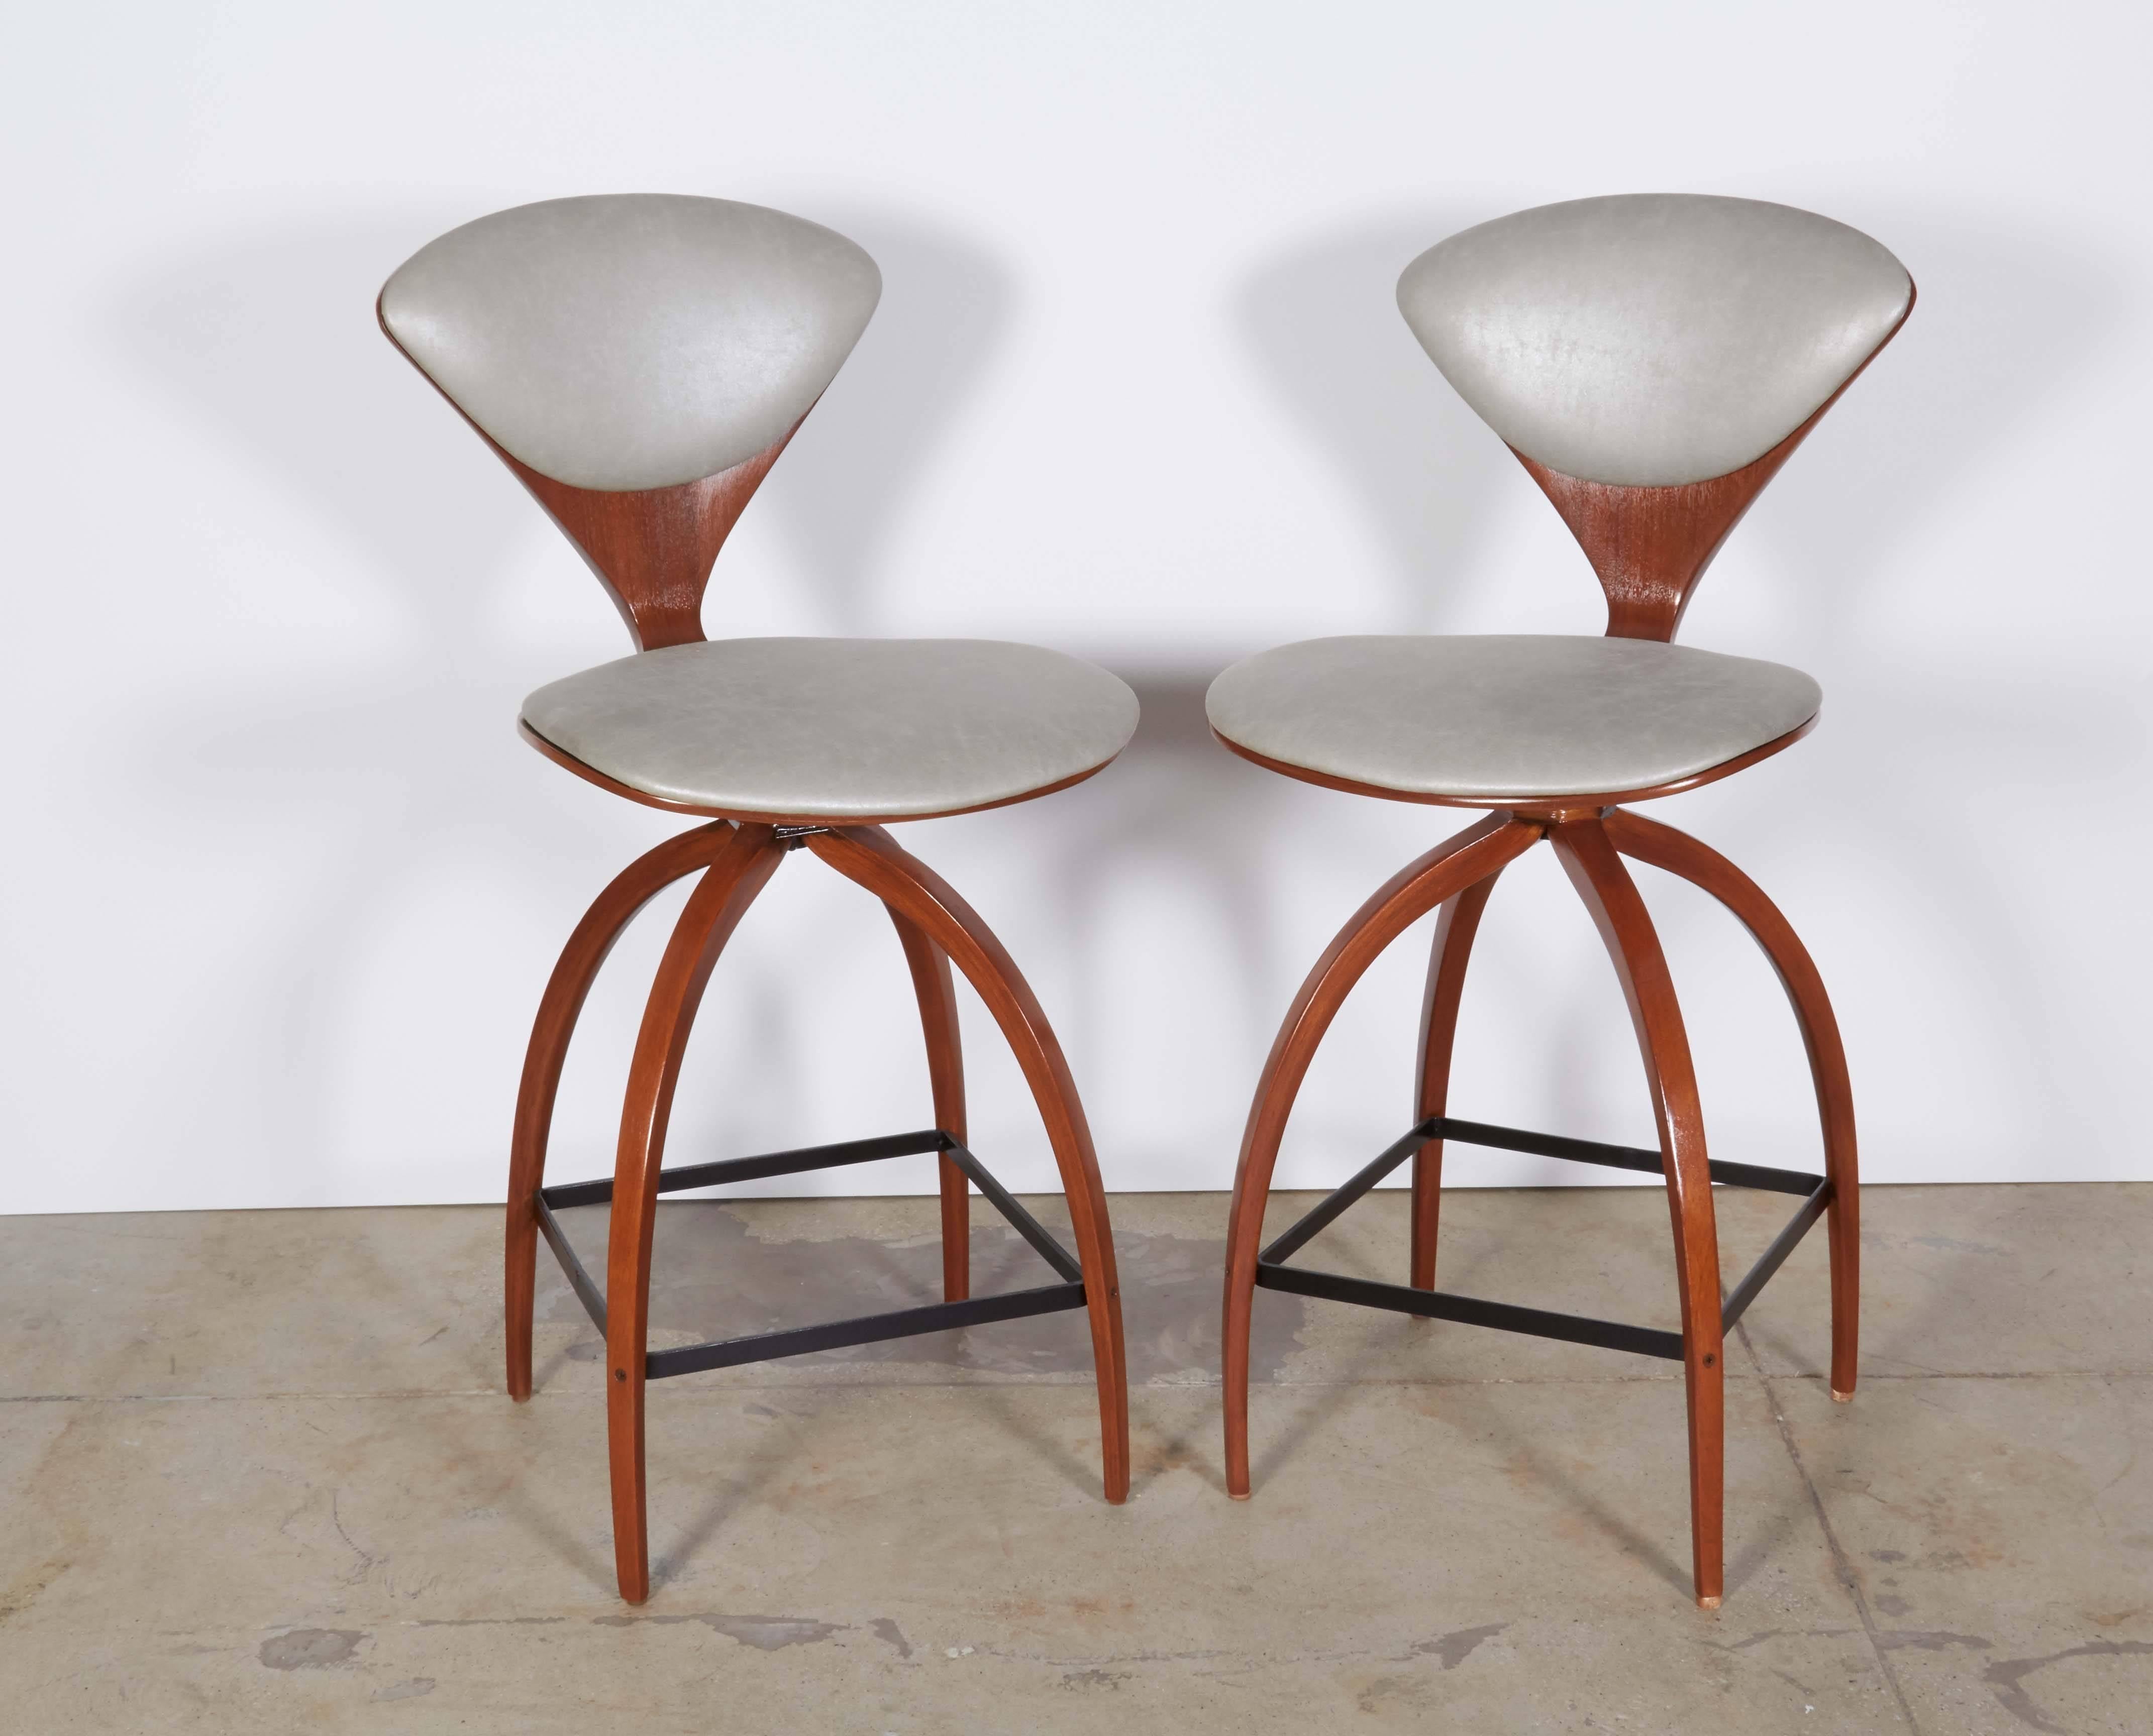 Early edition pair of Mid-Century classic bar stools with bentwood frames and iron stretchers. Stools have been mint restored and feature new padding and upholstery in a neutral light gray coated cotton.